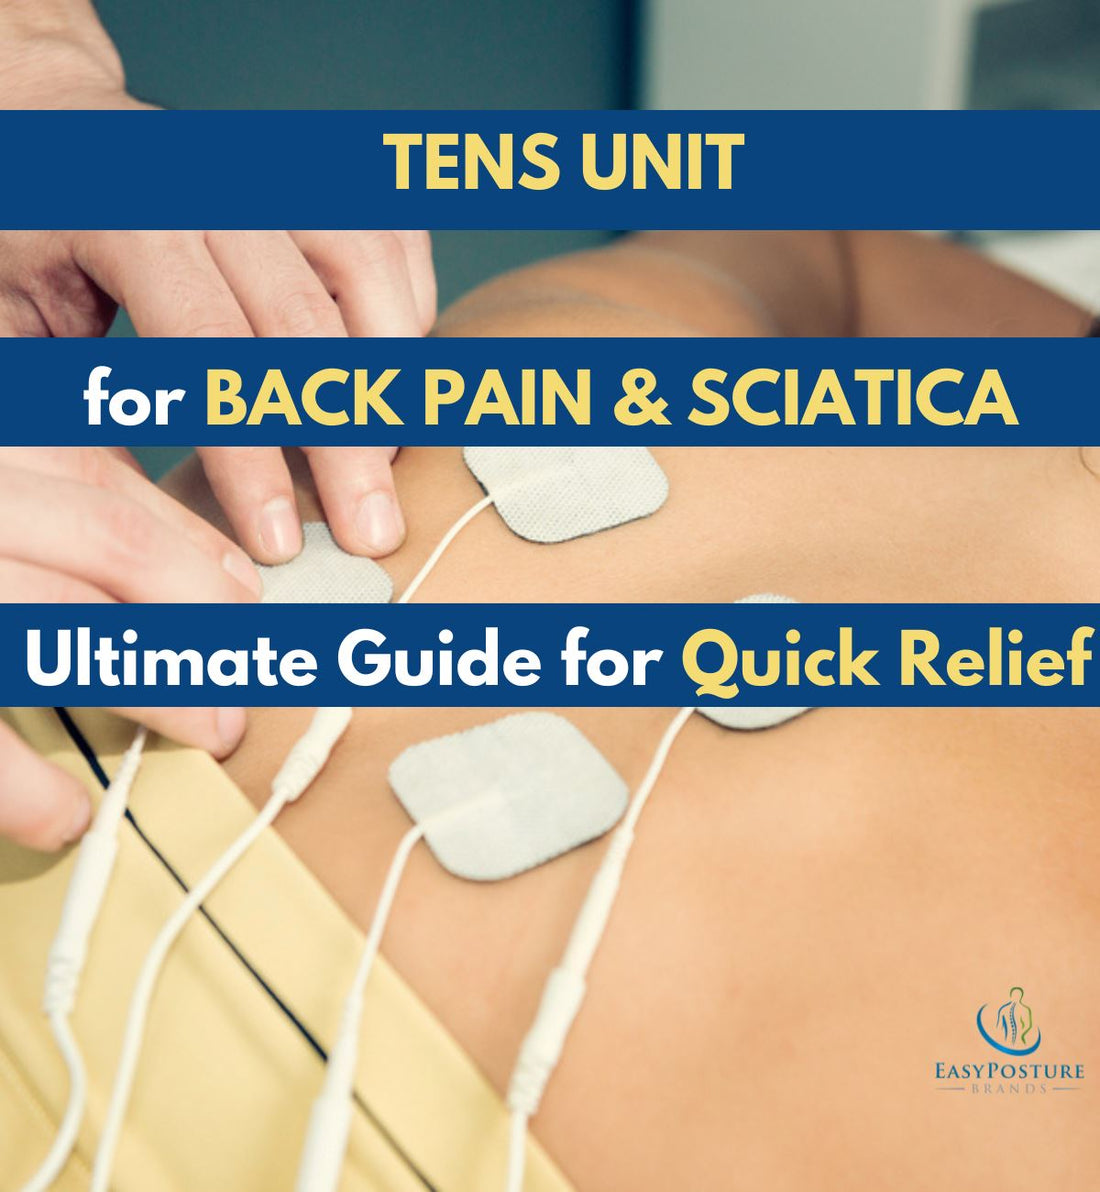 TENS Unit for Back Pain: Ultimate Guide for Quick Back Pain & Sciatica Relief